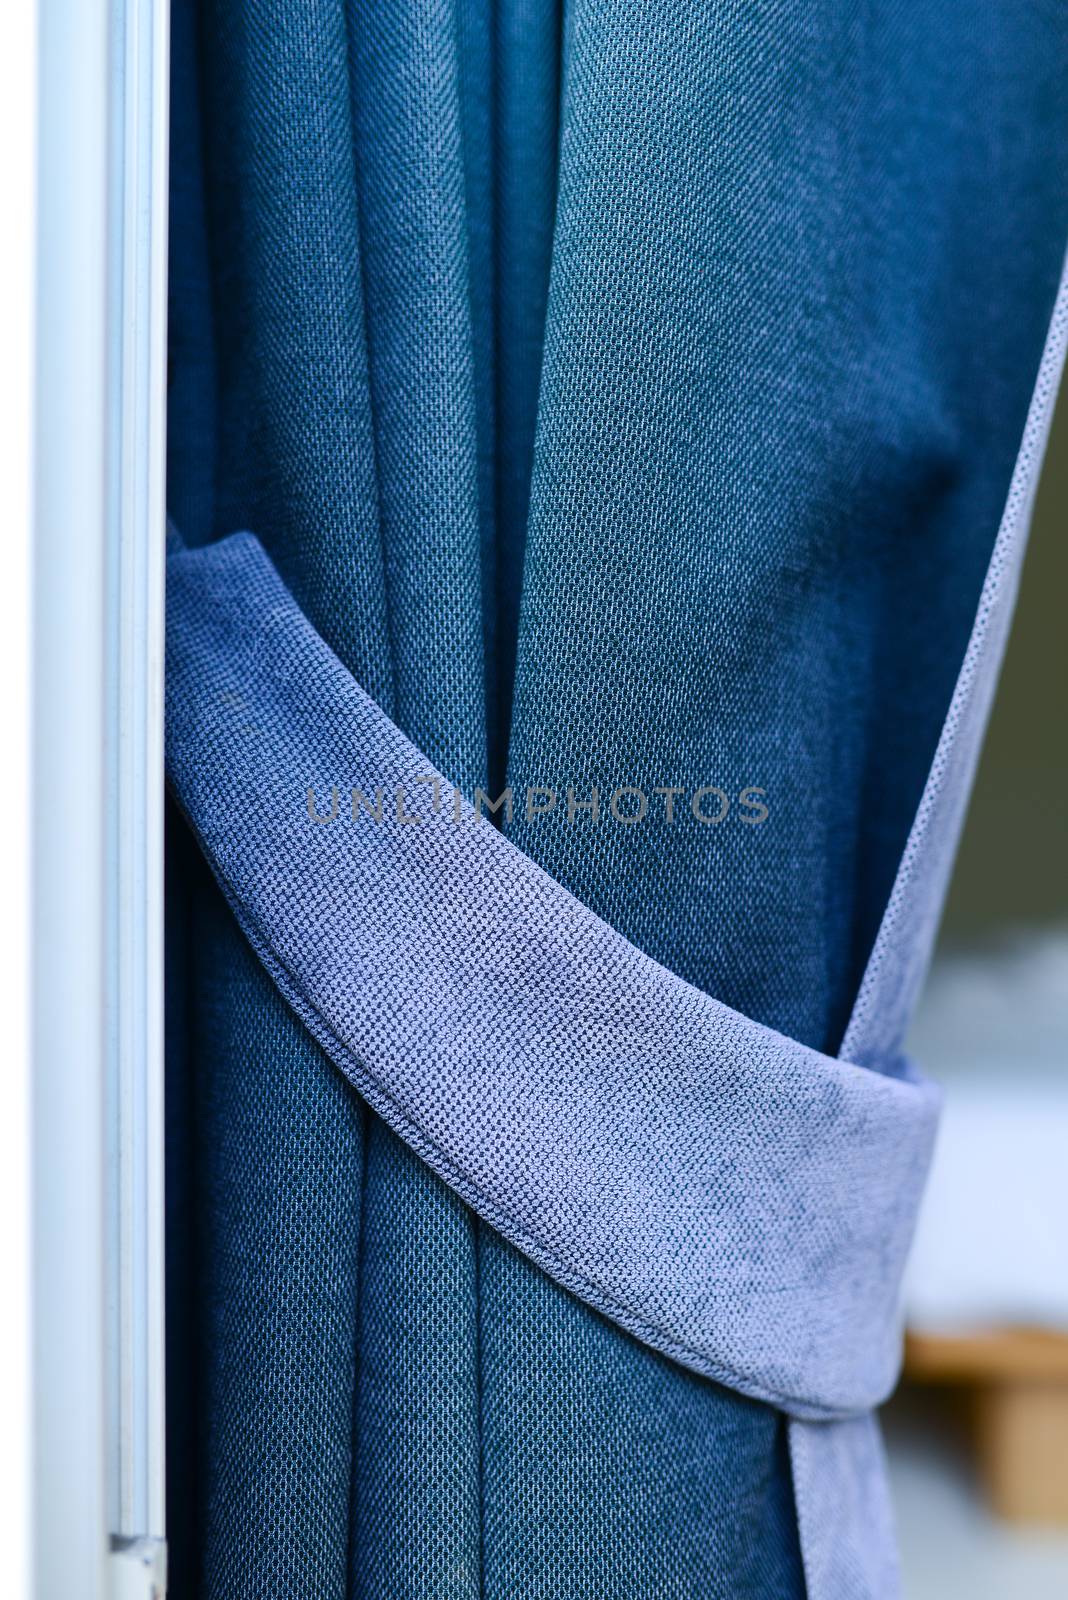 blue curtain with garter